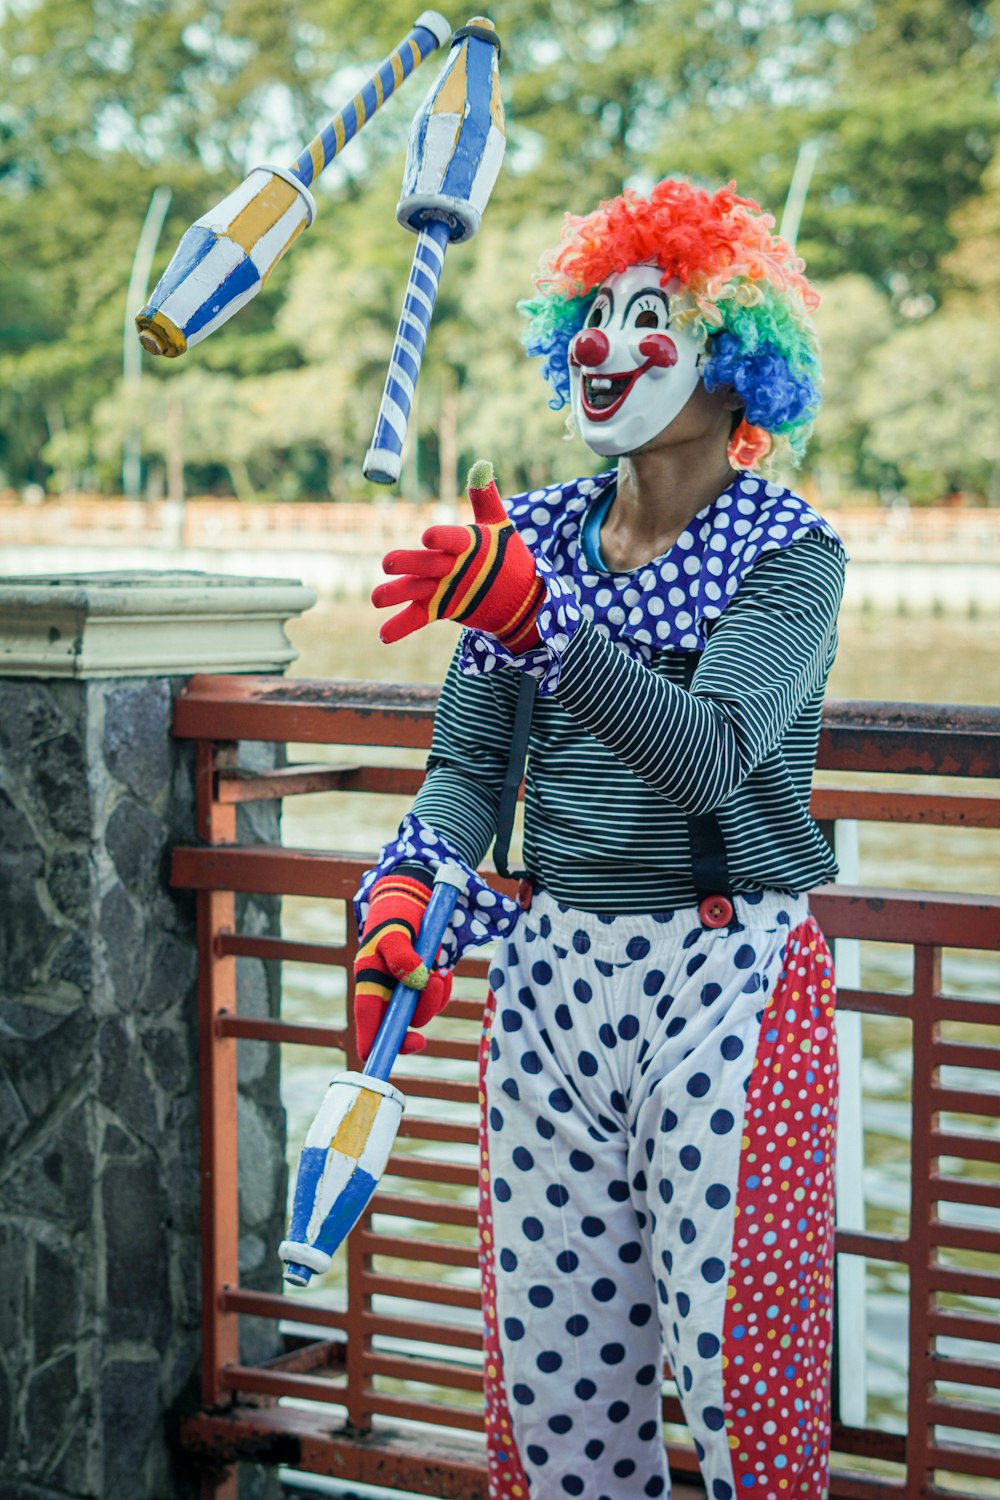 a clown with a clown mask holding a kite